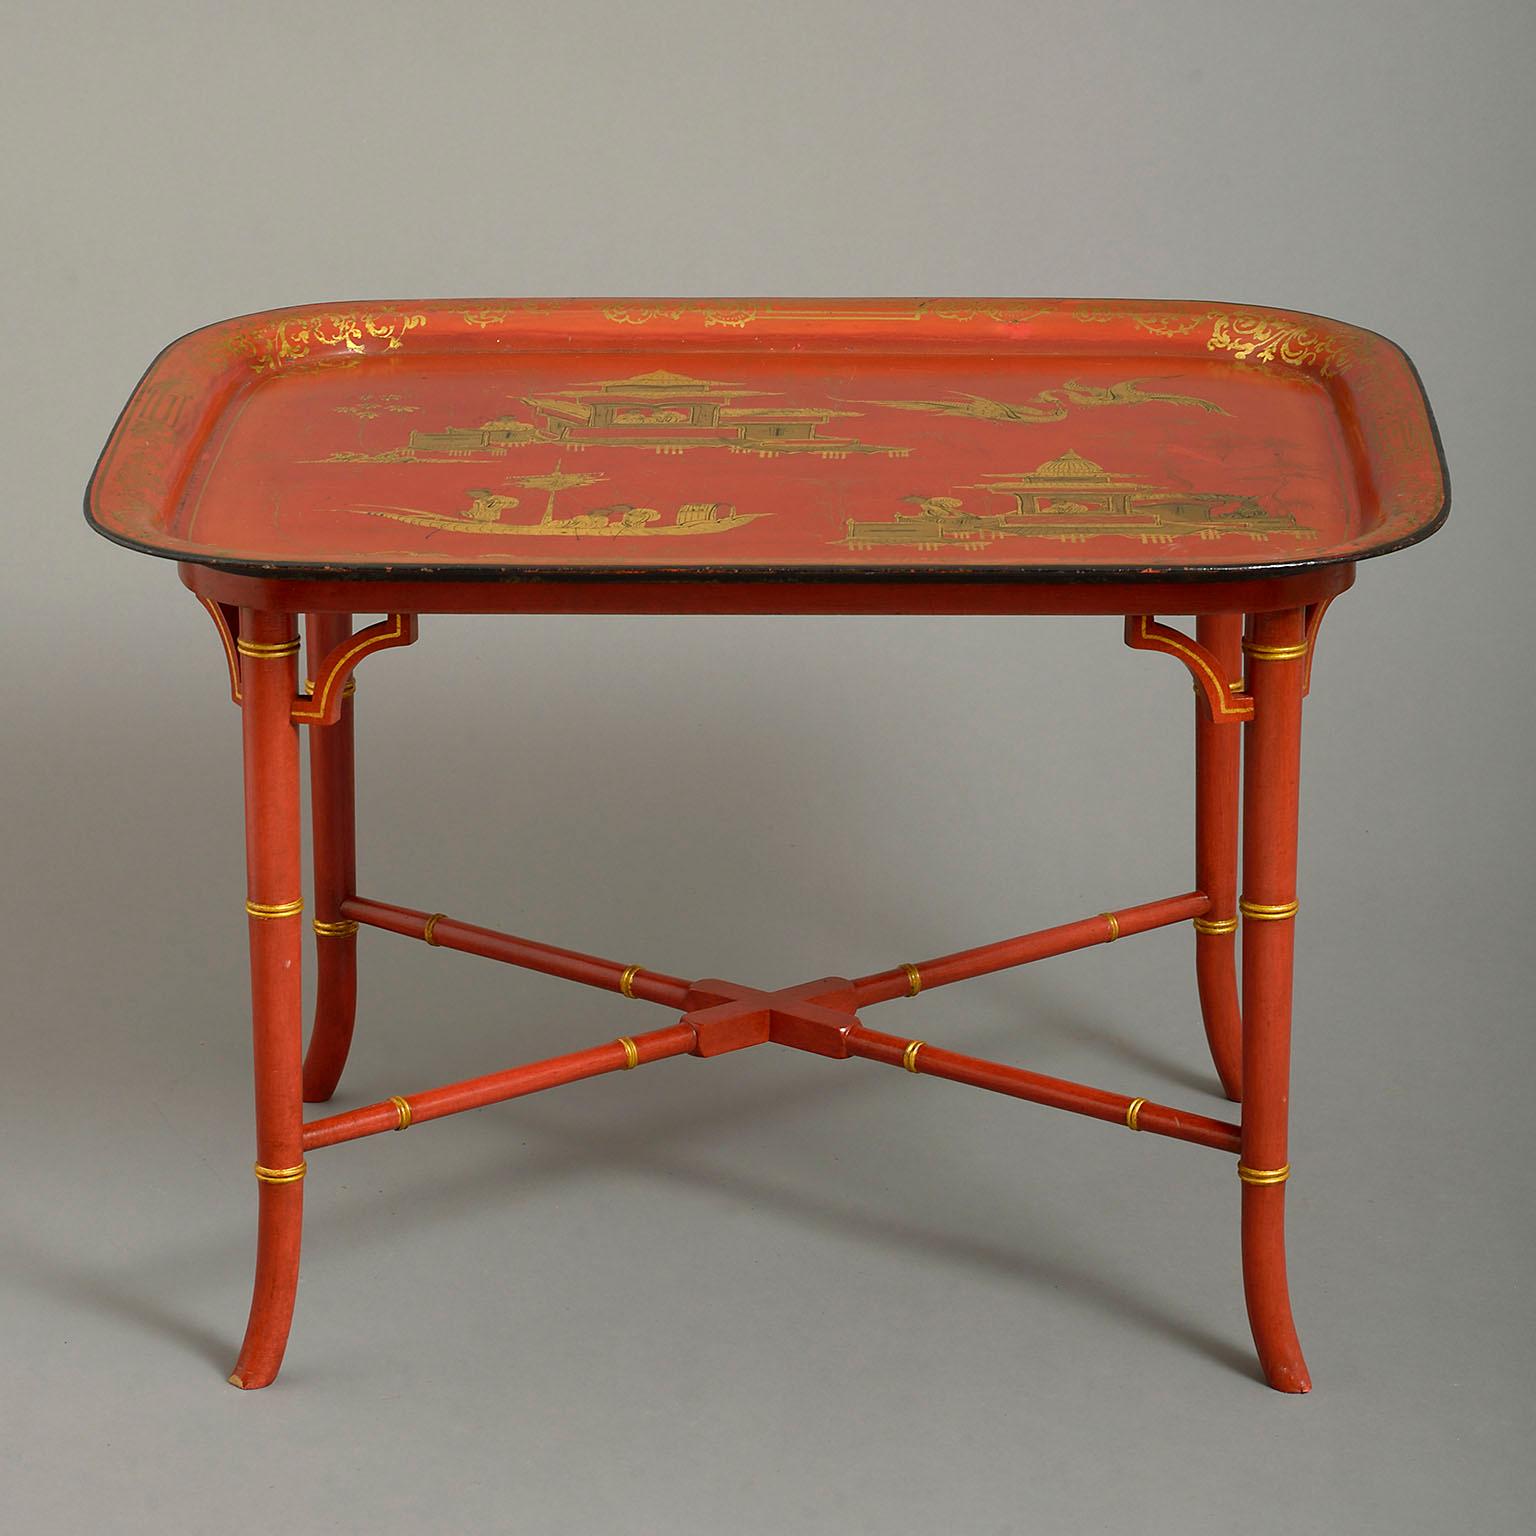 An early 19th century Regency japanned tole tray forming a coffee table, decorated with chinoiserie scenes on a sealing-wax red ground and with later conforming vogue Regency stand.